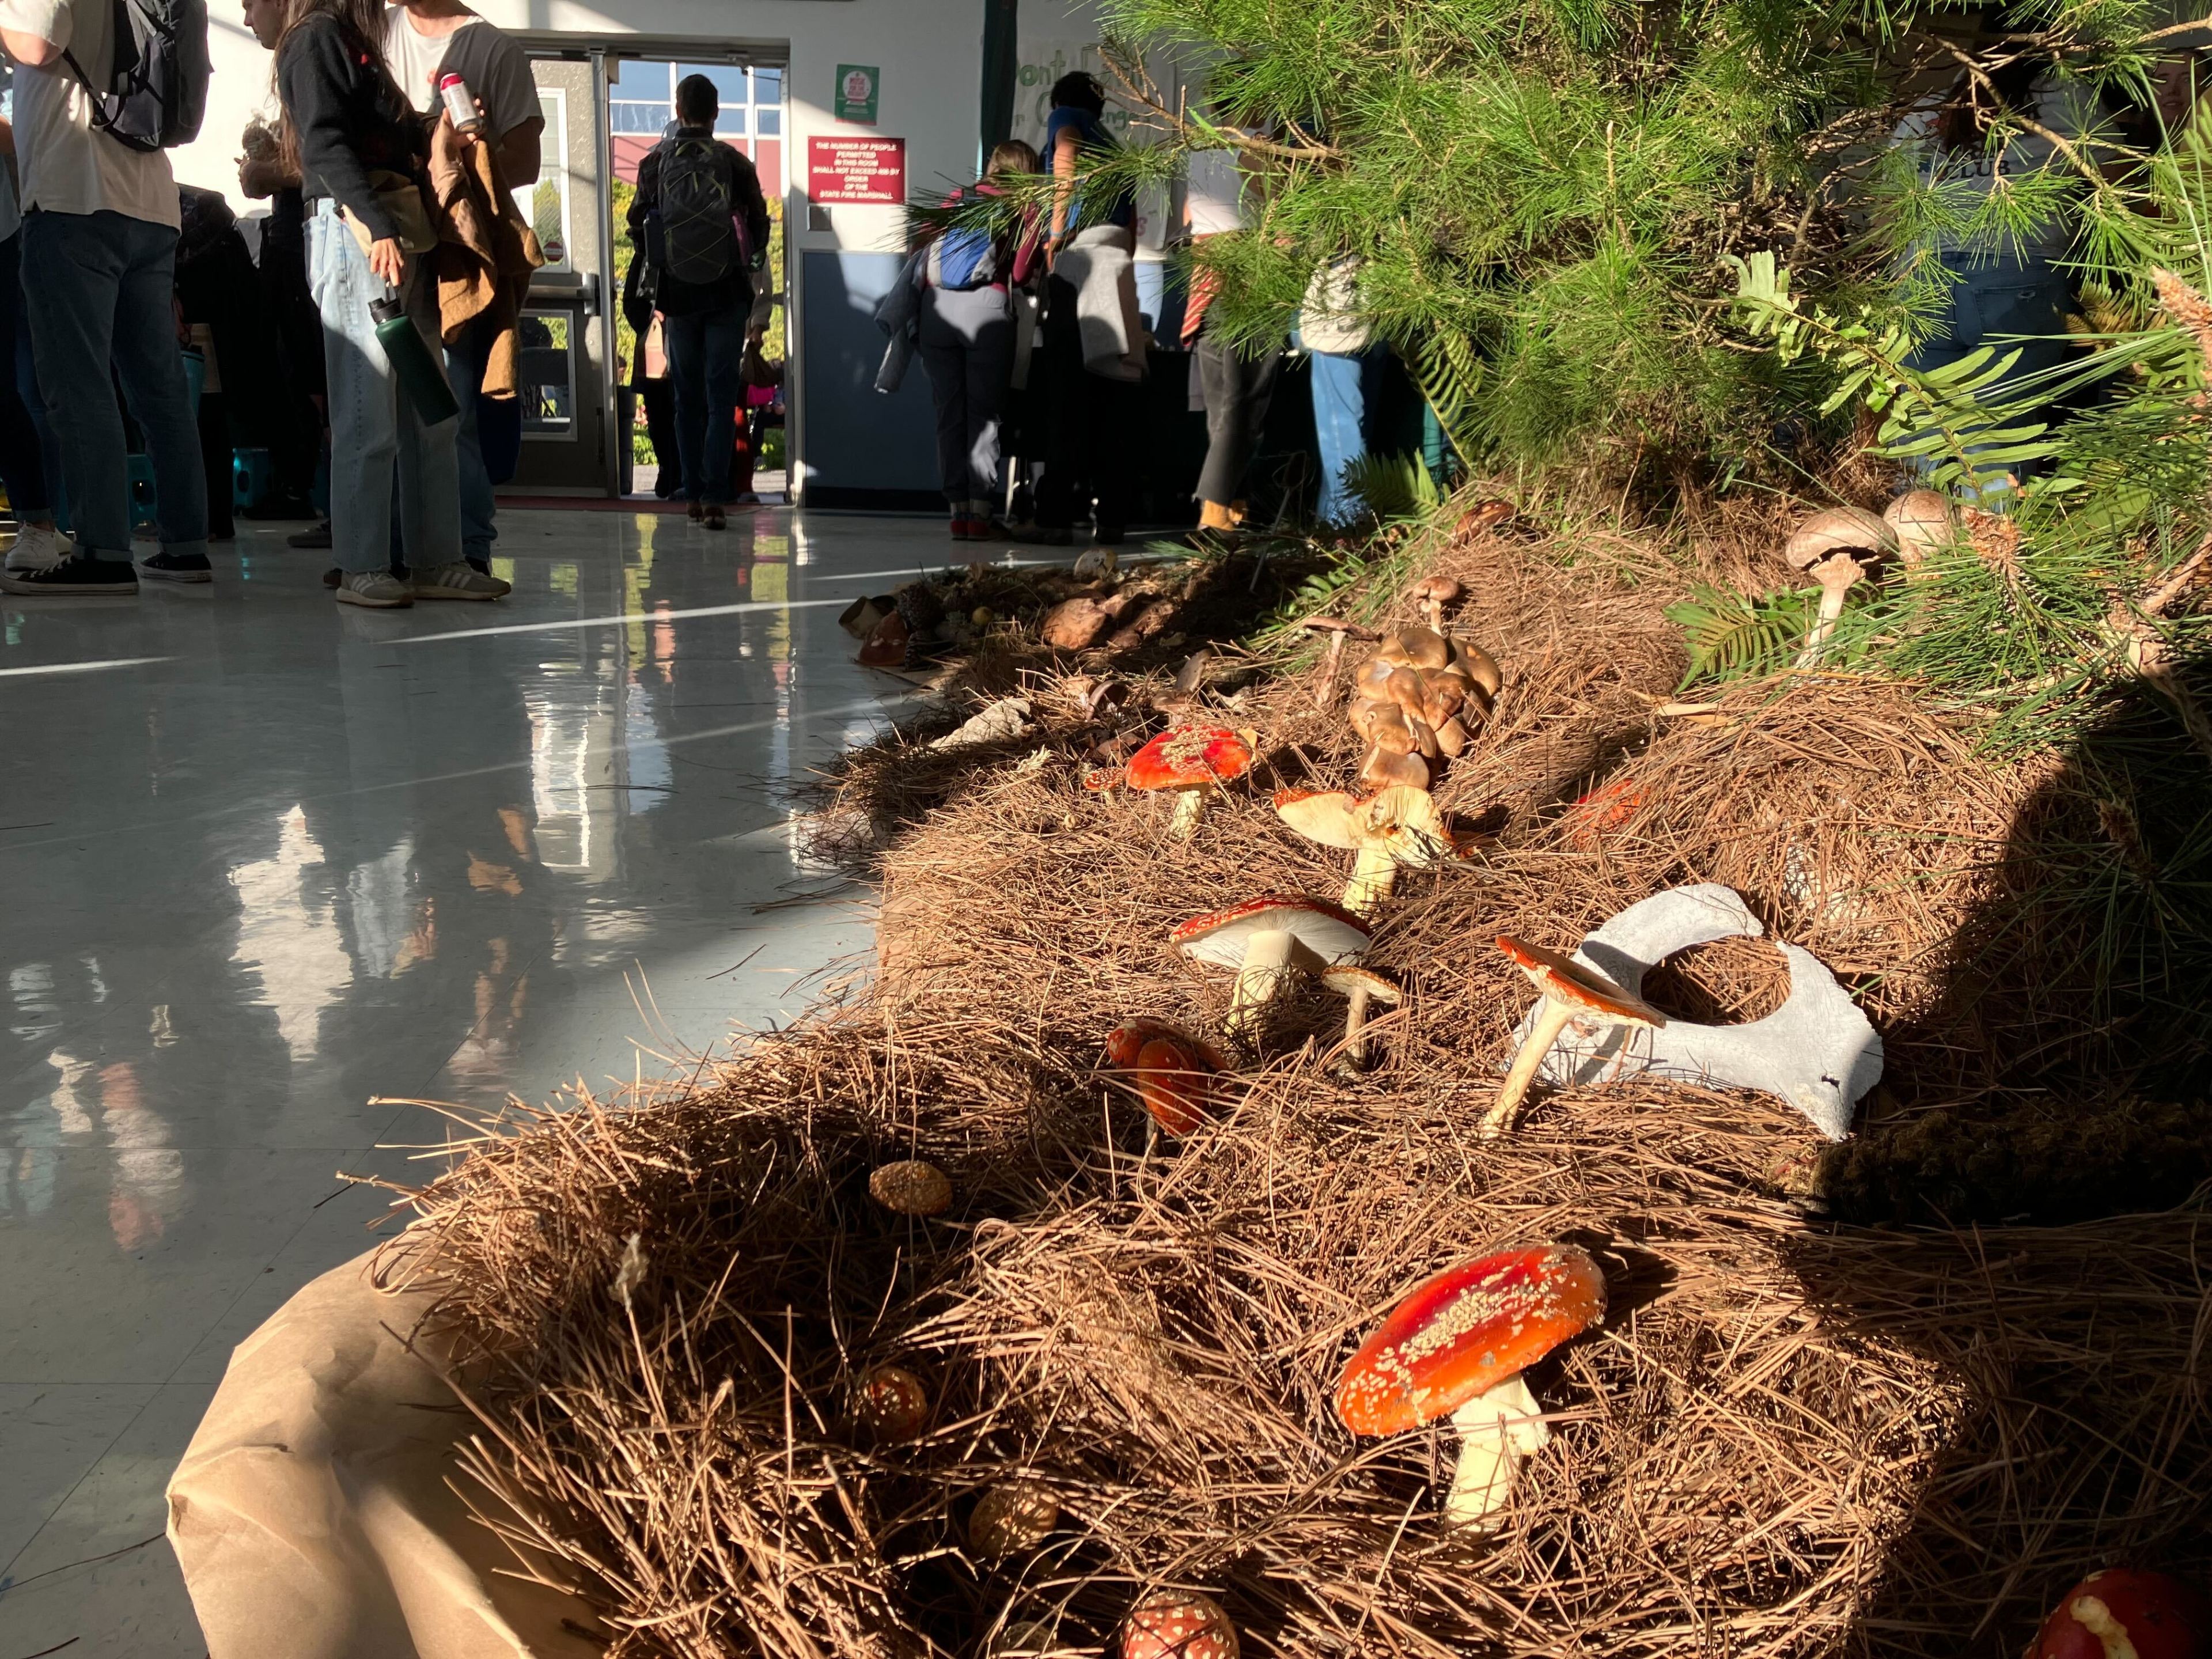 Mushrooms protrude out of a mushroom exhibit at the 51st annual Fungus Fair at El Camino High School in South San Francisco on Dec. 16, 2023.